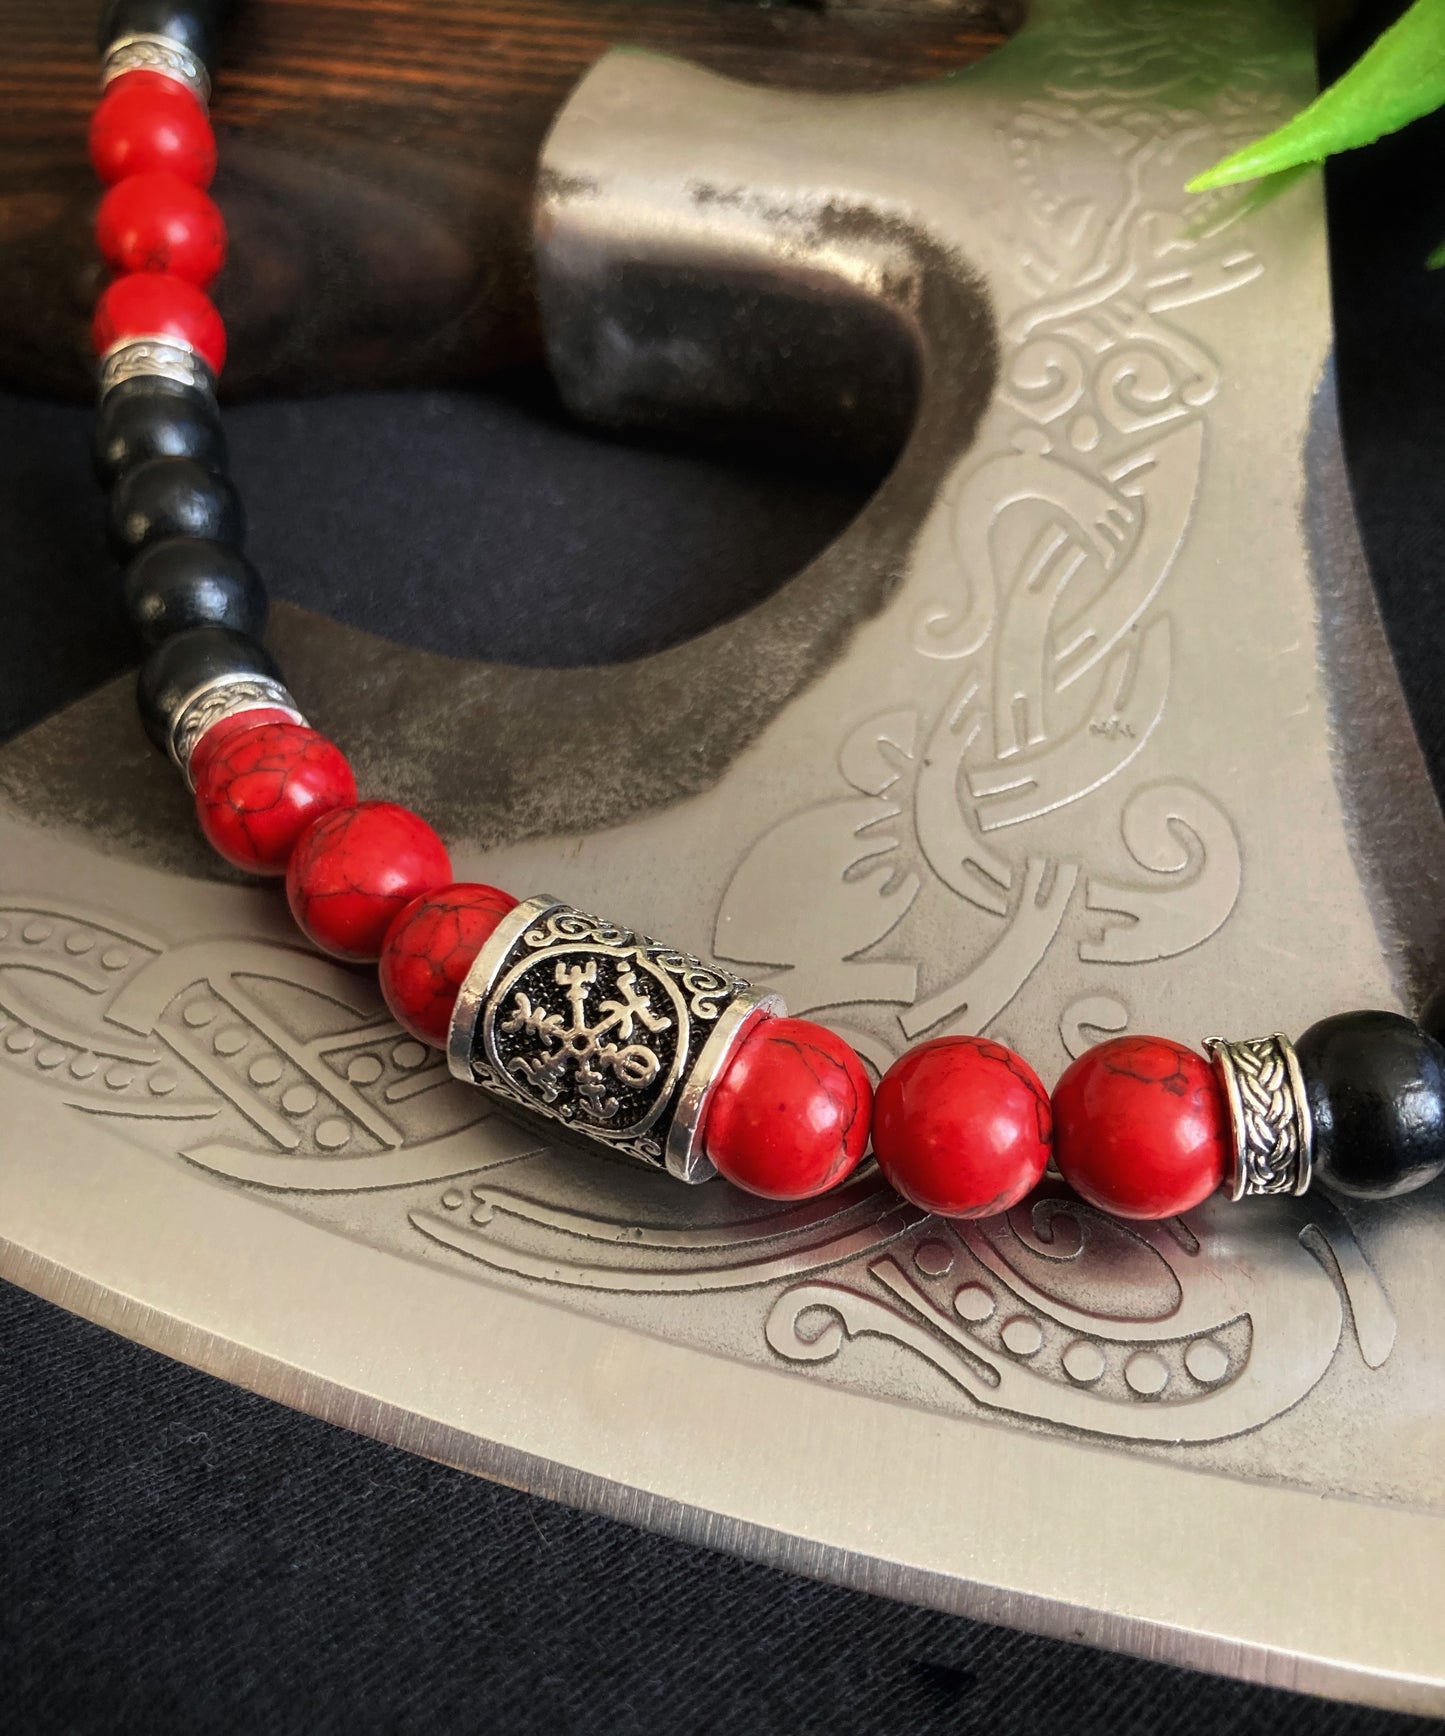 Part of a necklace sits on a axe blade. The vegvisir cylindrical metal bead is seen and is shiny in appearance. Both the red and black beads are glistening where the light is bouncing off of them.